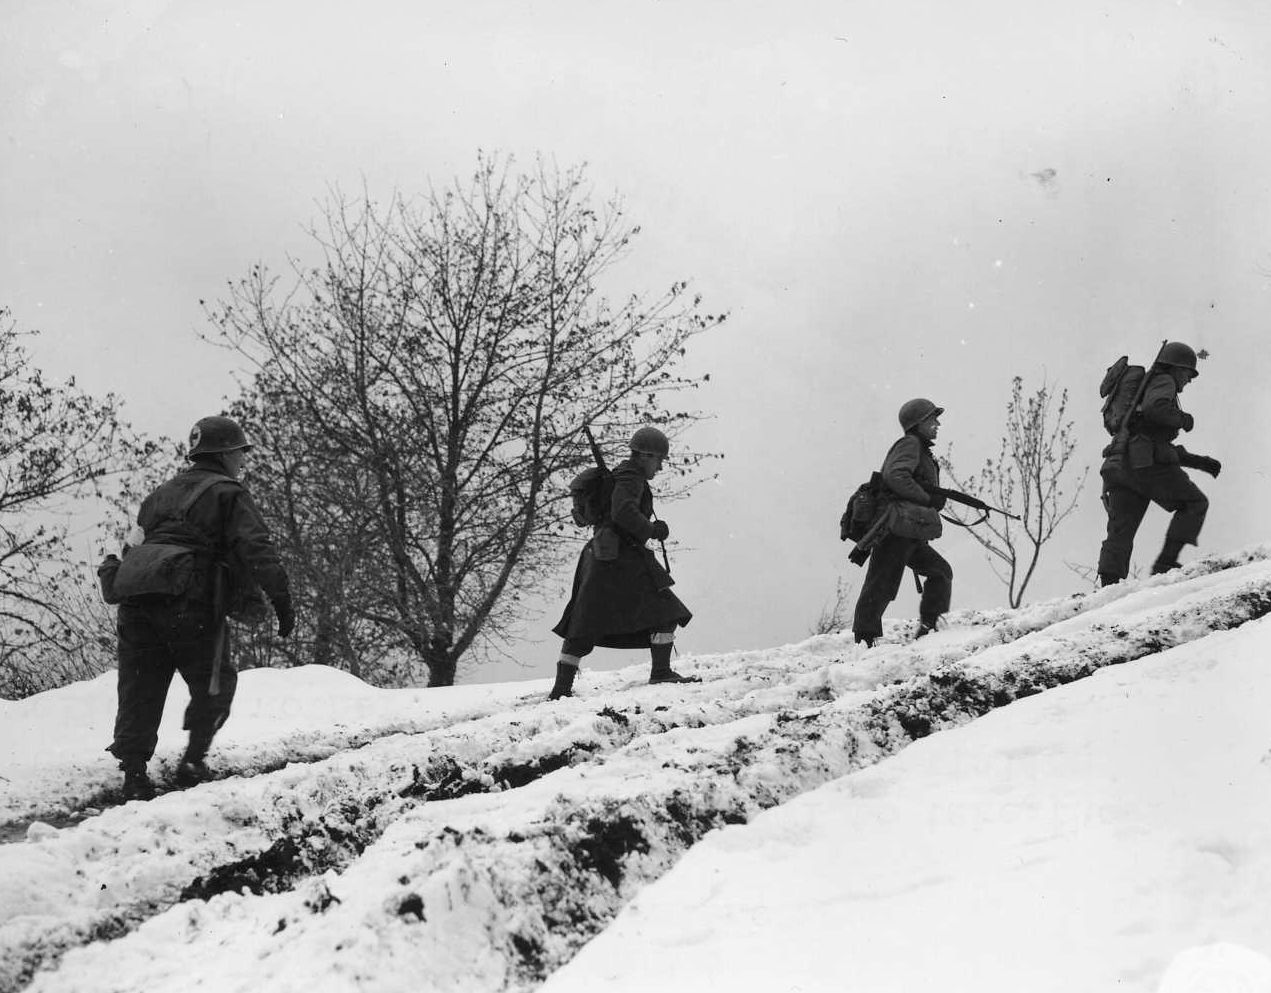 Carrying their weapons and heavy equipment, American soldiers trudge up a steep incline toward frontline positions. Although it has been overshadowed by the fighting in the Bulge, the combat in Southern France was nevertheless ferocious. 